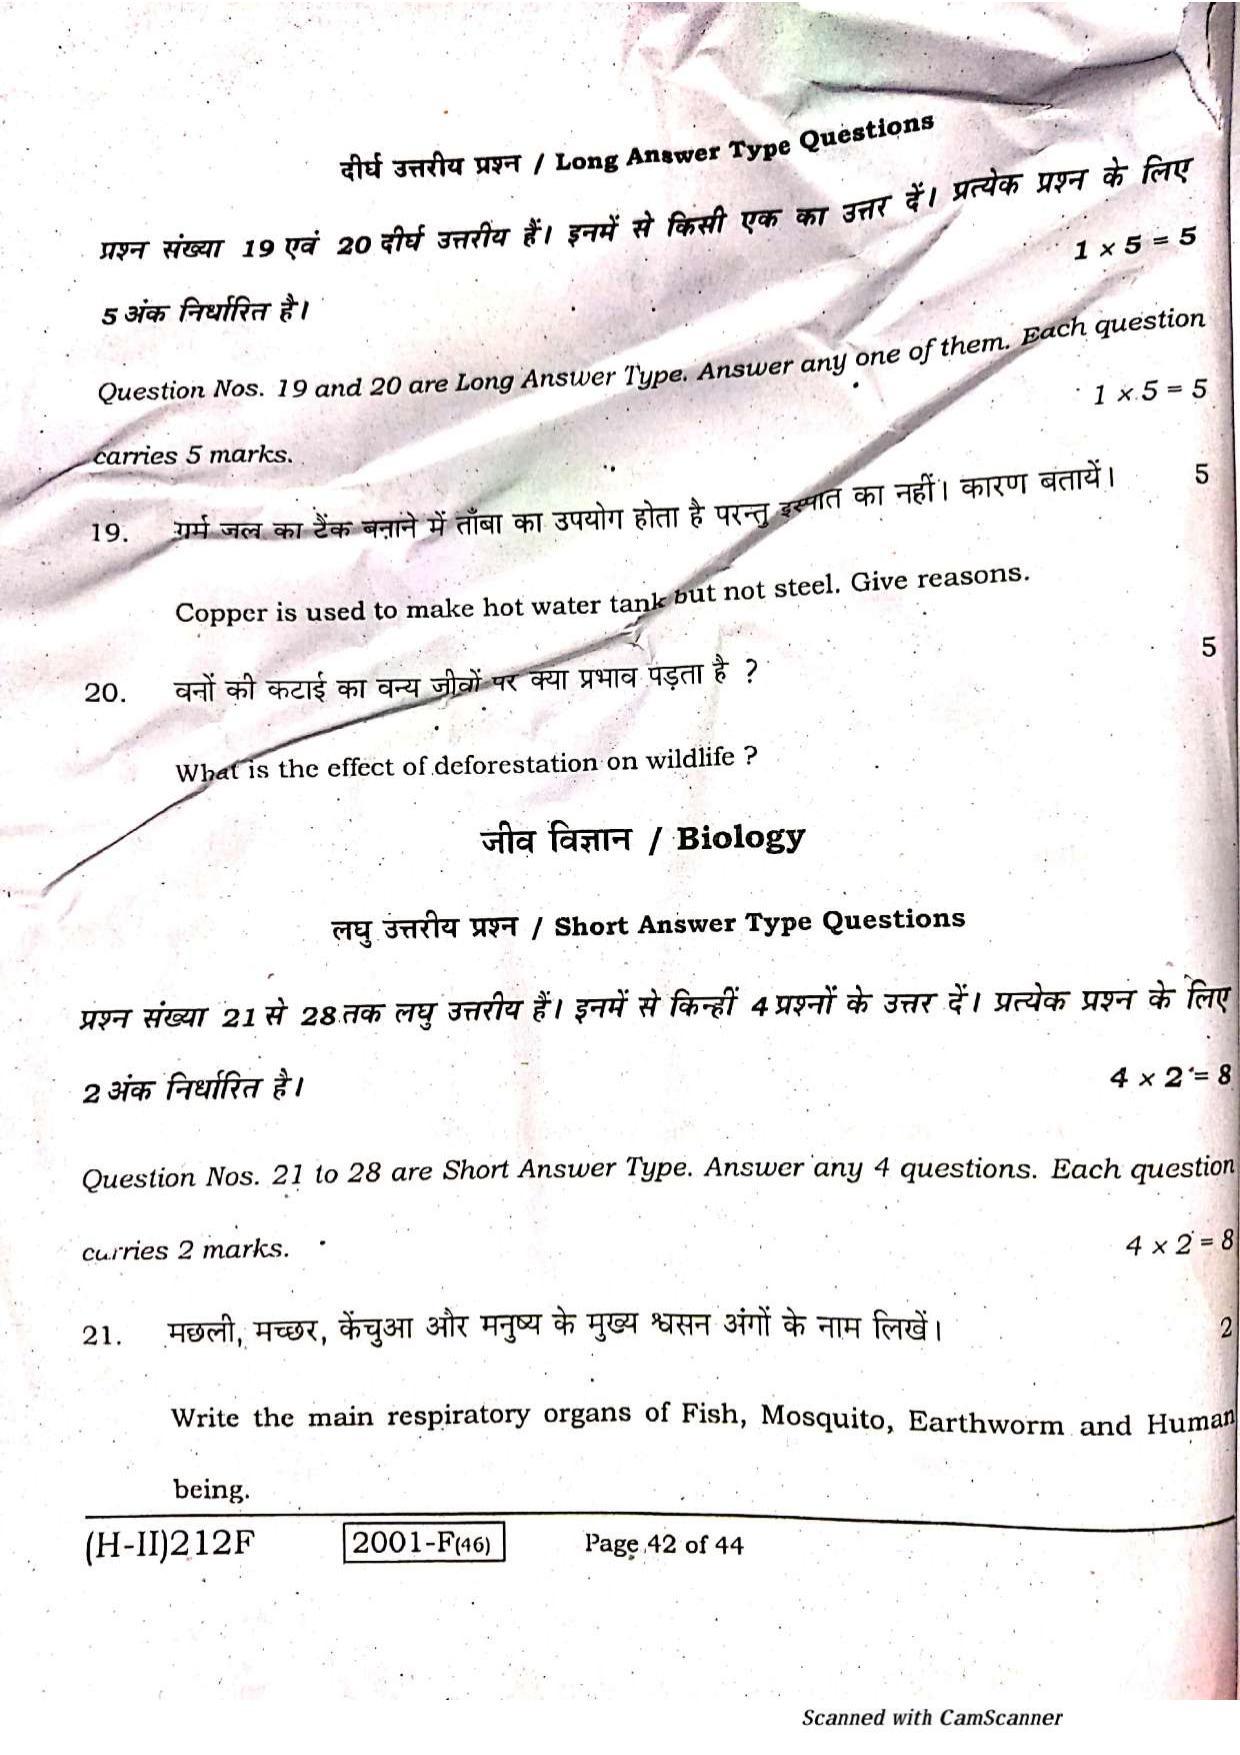 Bihar Board Class 10 Science 2021 (2nd Sitting) Question Paper - Page 40